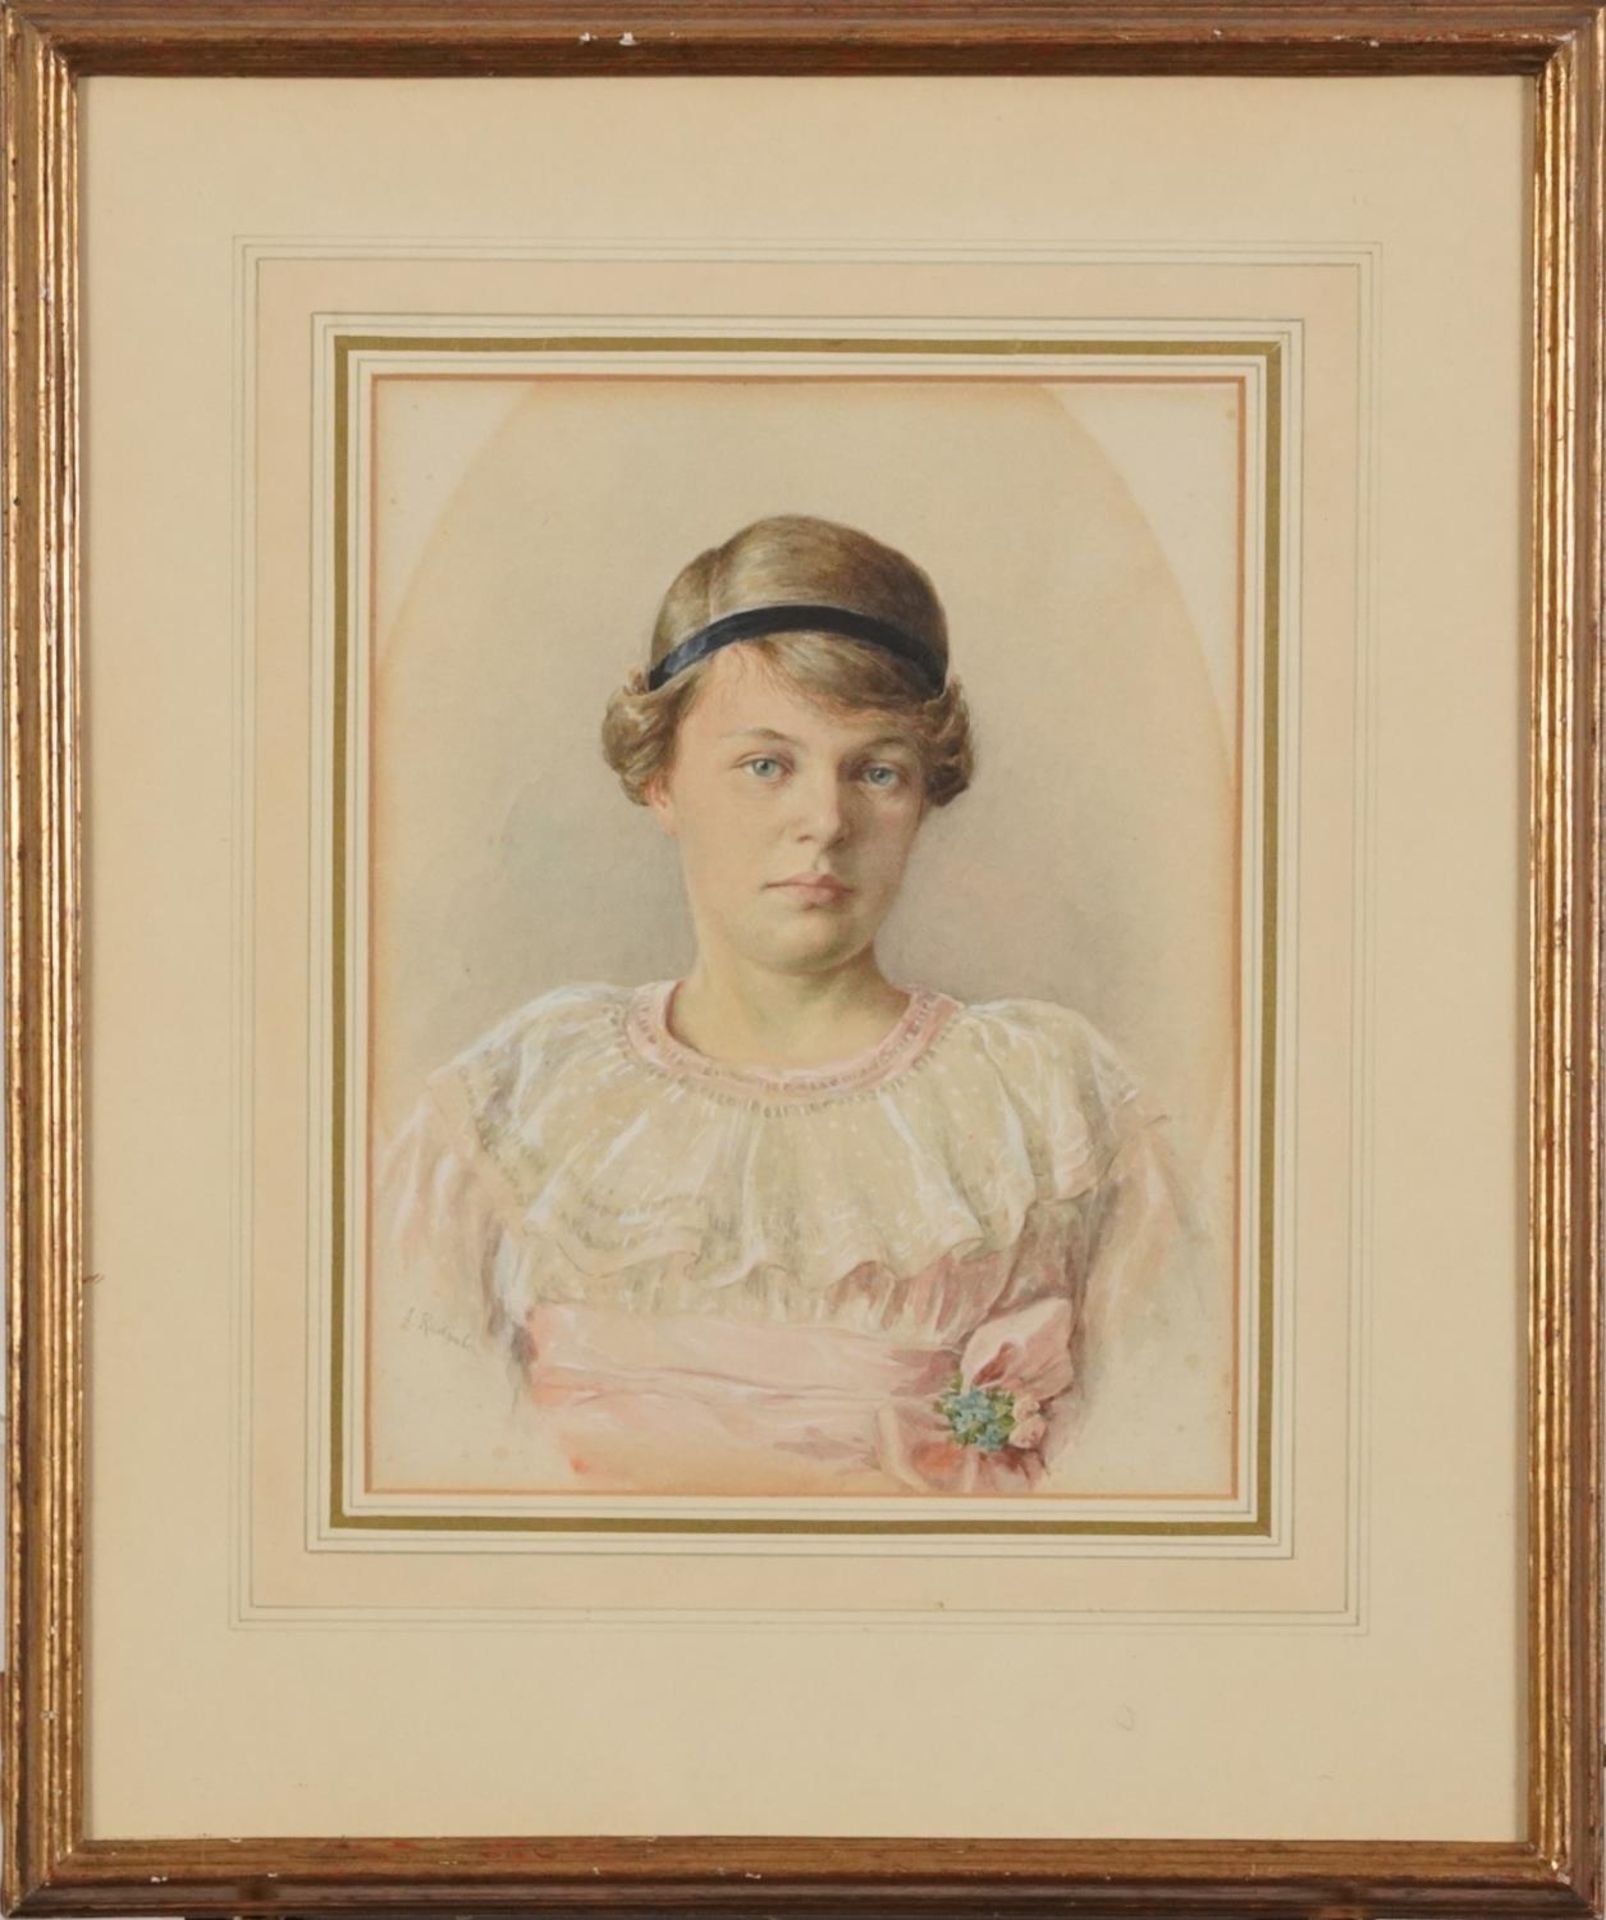 L Ruckgaber - Early 20th century head and shoulders portrait of a young female, signed - Image 2 of 4